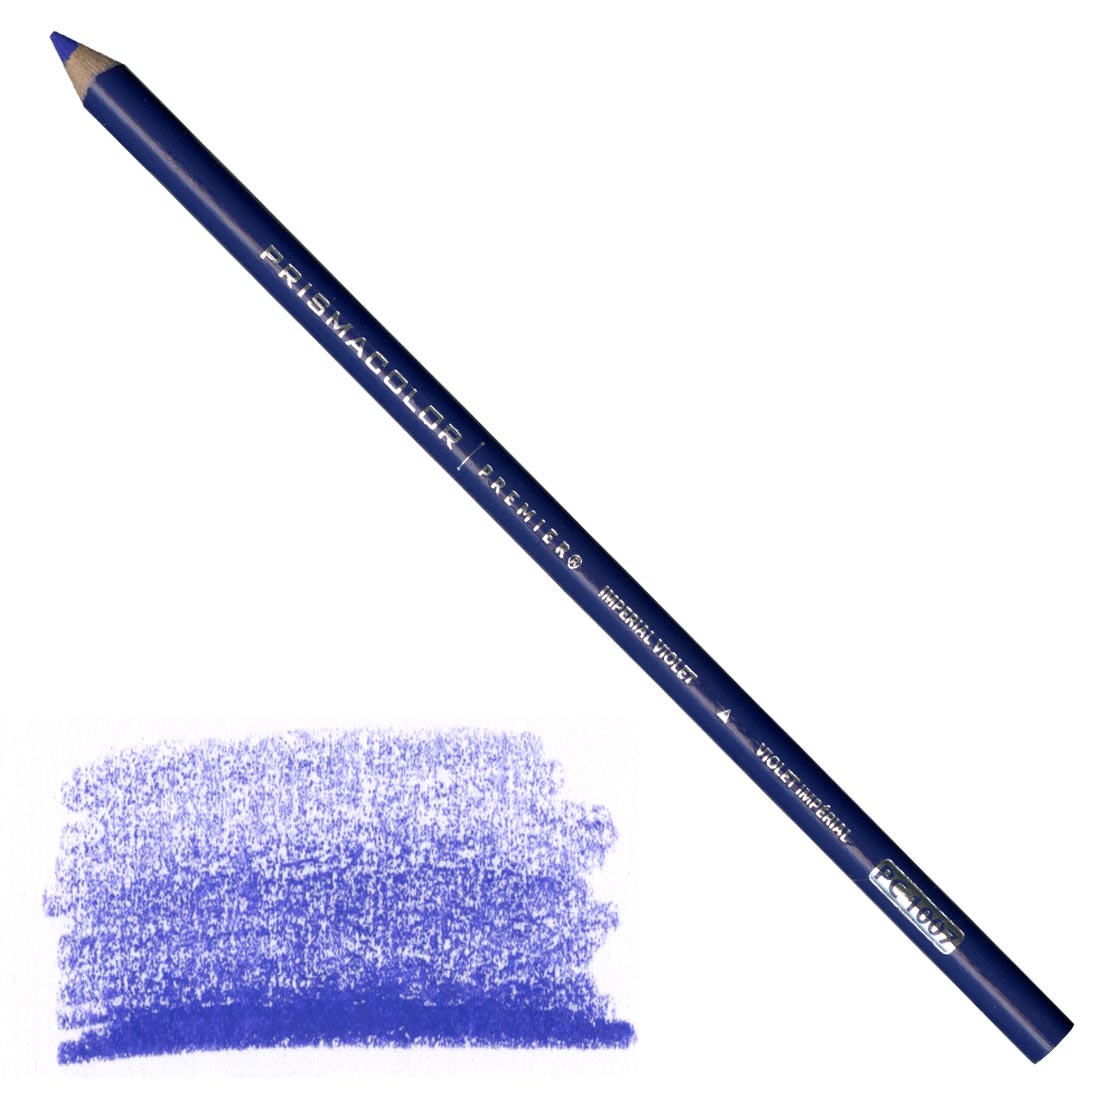 Imperial Violet Prismacolor Premier Colored Pencil with a sample colored swatch